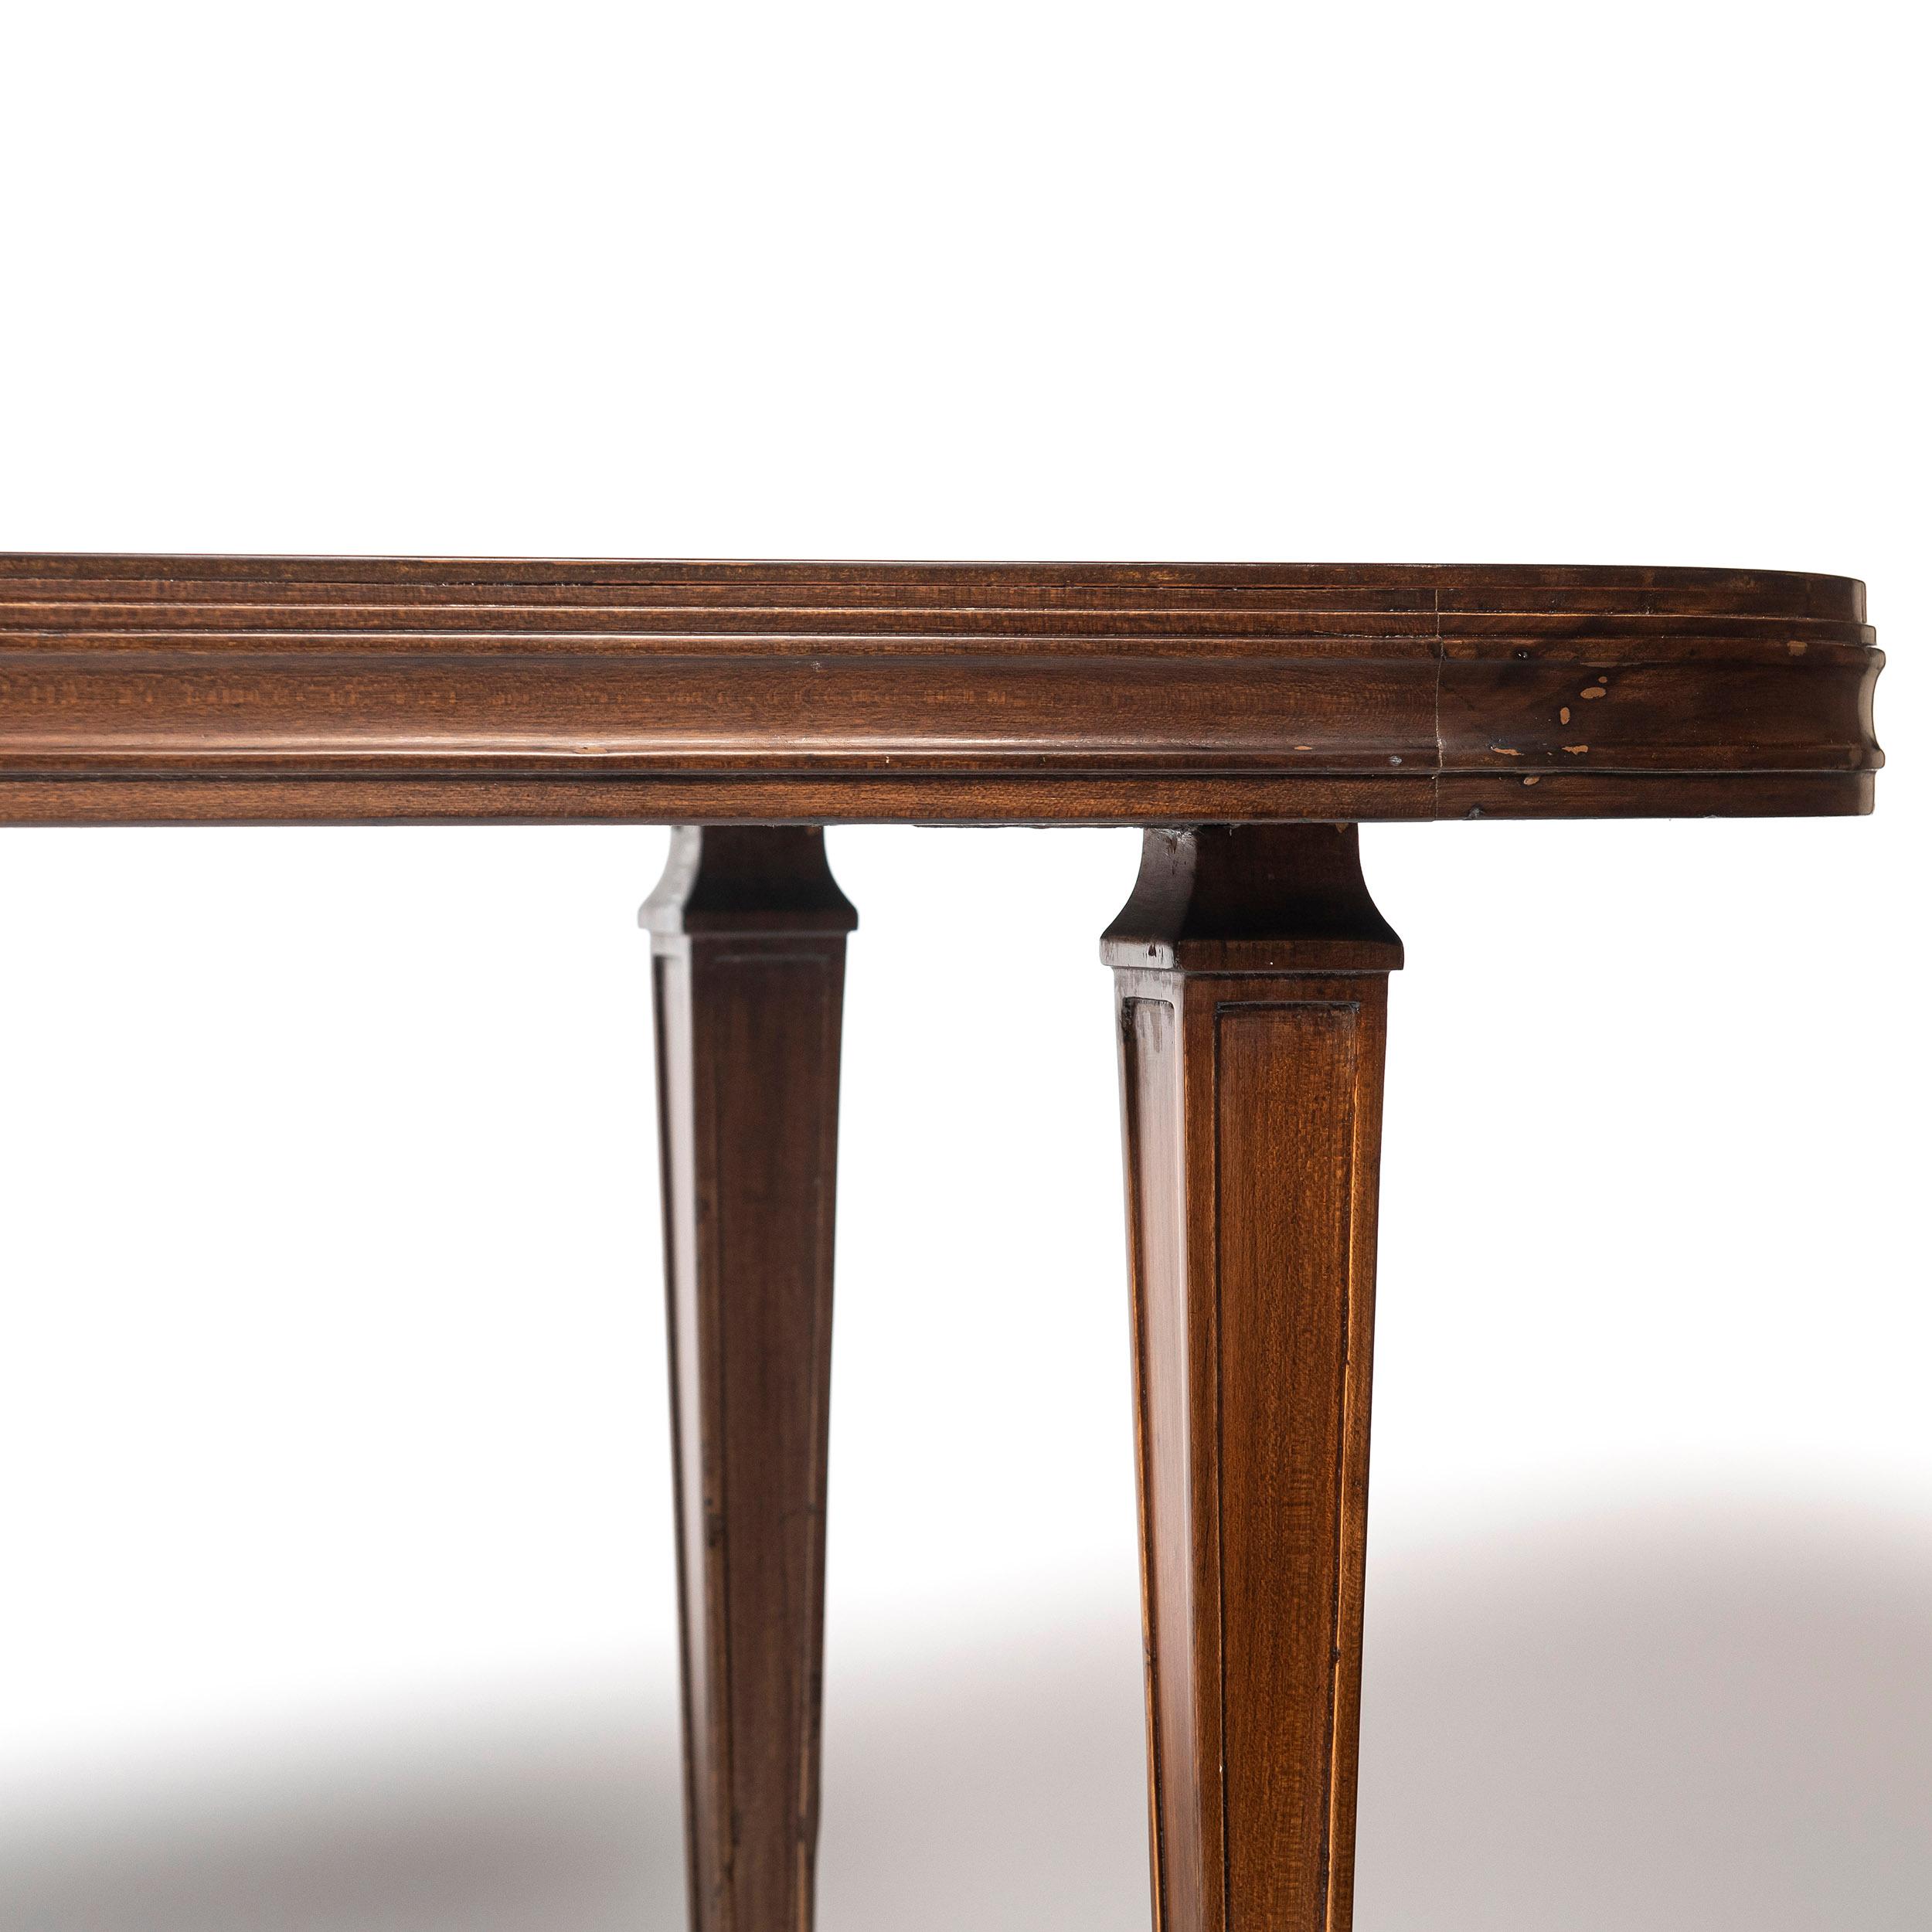 Mid-20th Century Wood and Bronze Center Table by Comte, Argentina, Buenos Aires, circa 1940 For Sale